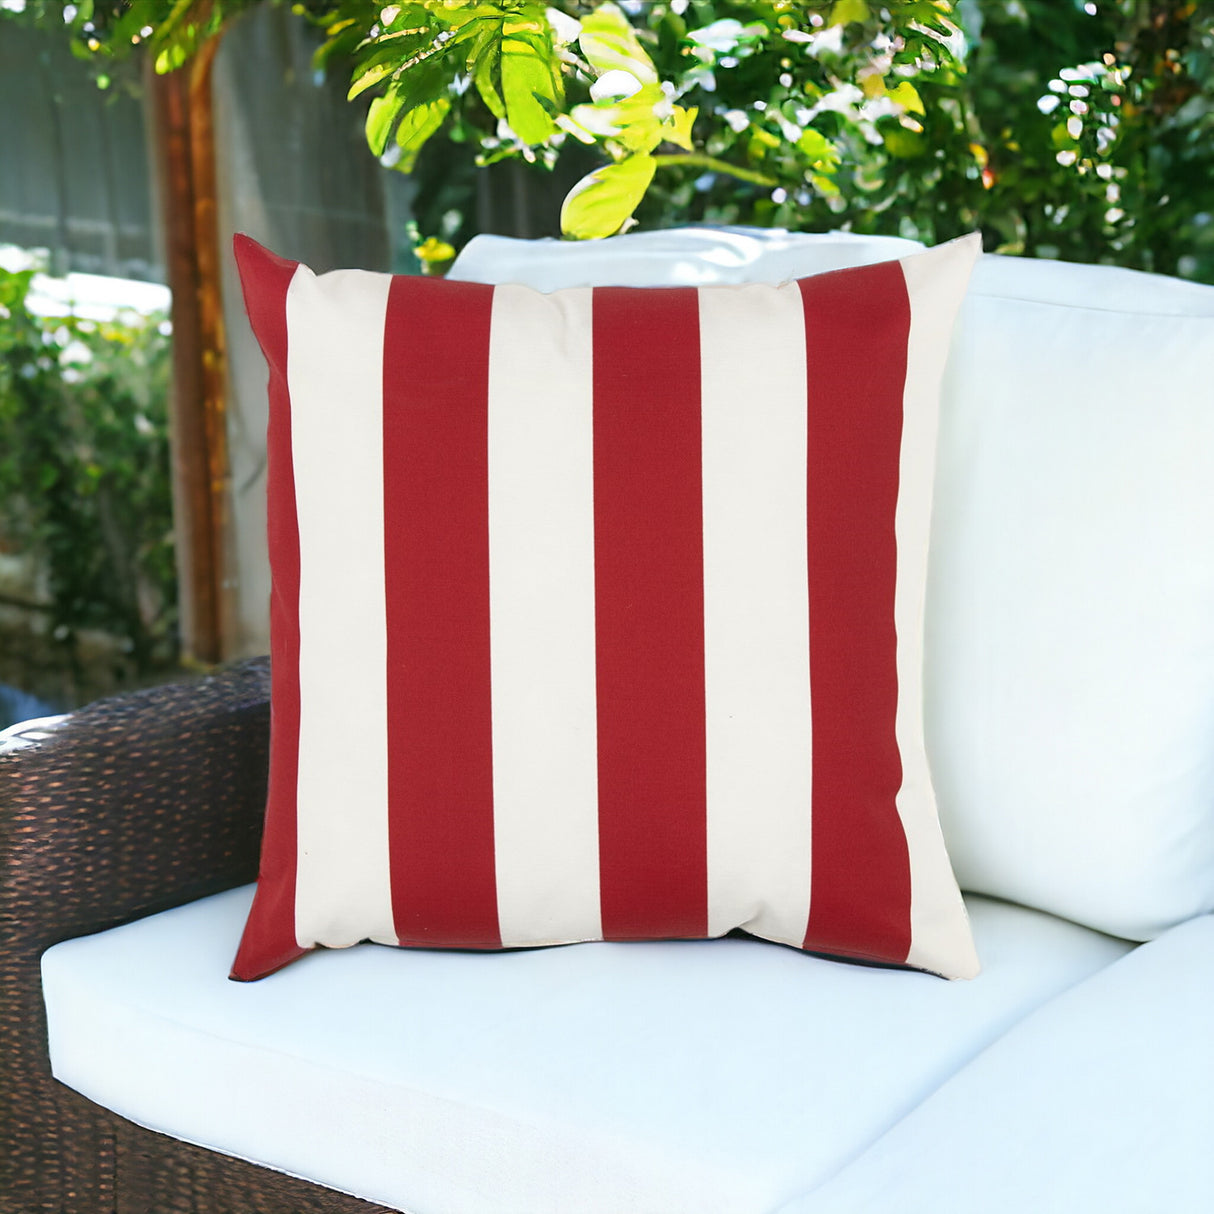 22" Red and White Striped Indoor Outdoor Throw Pillow